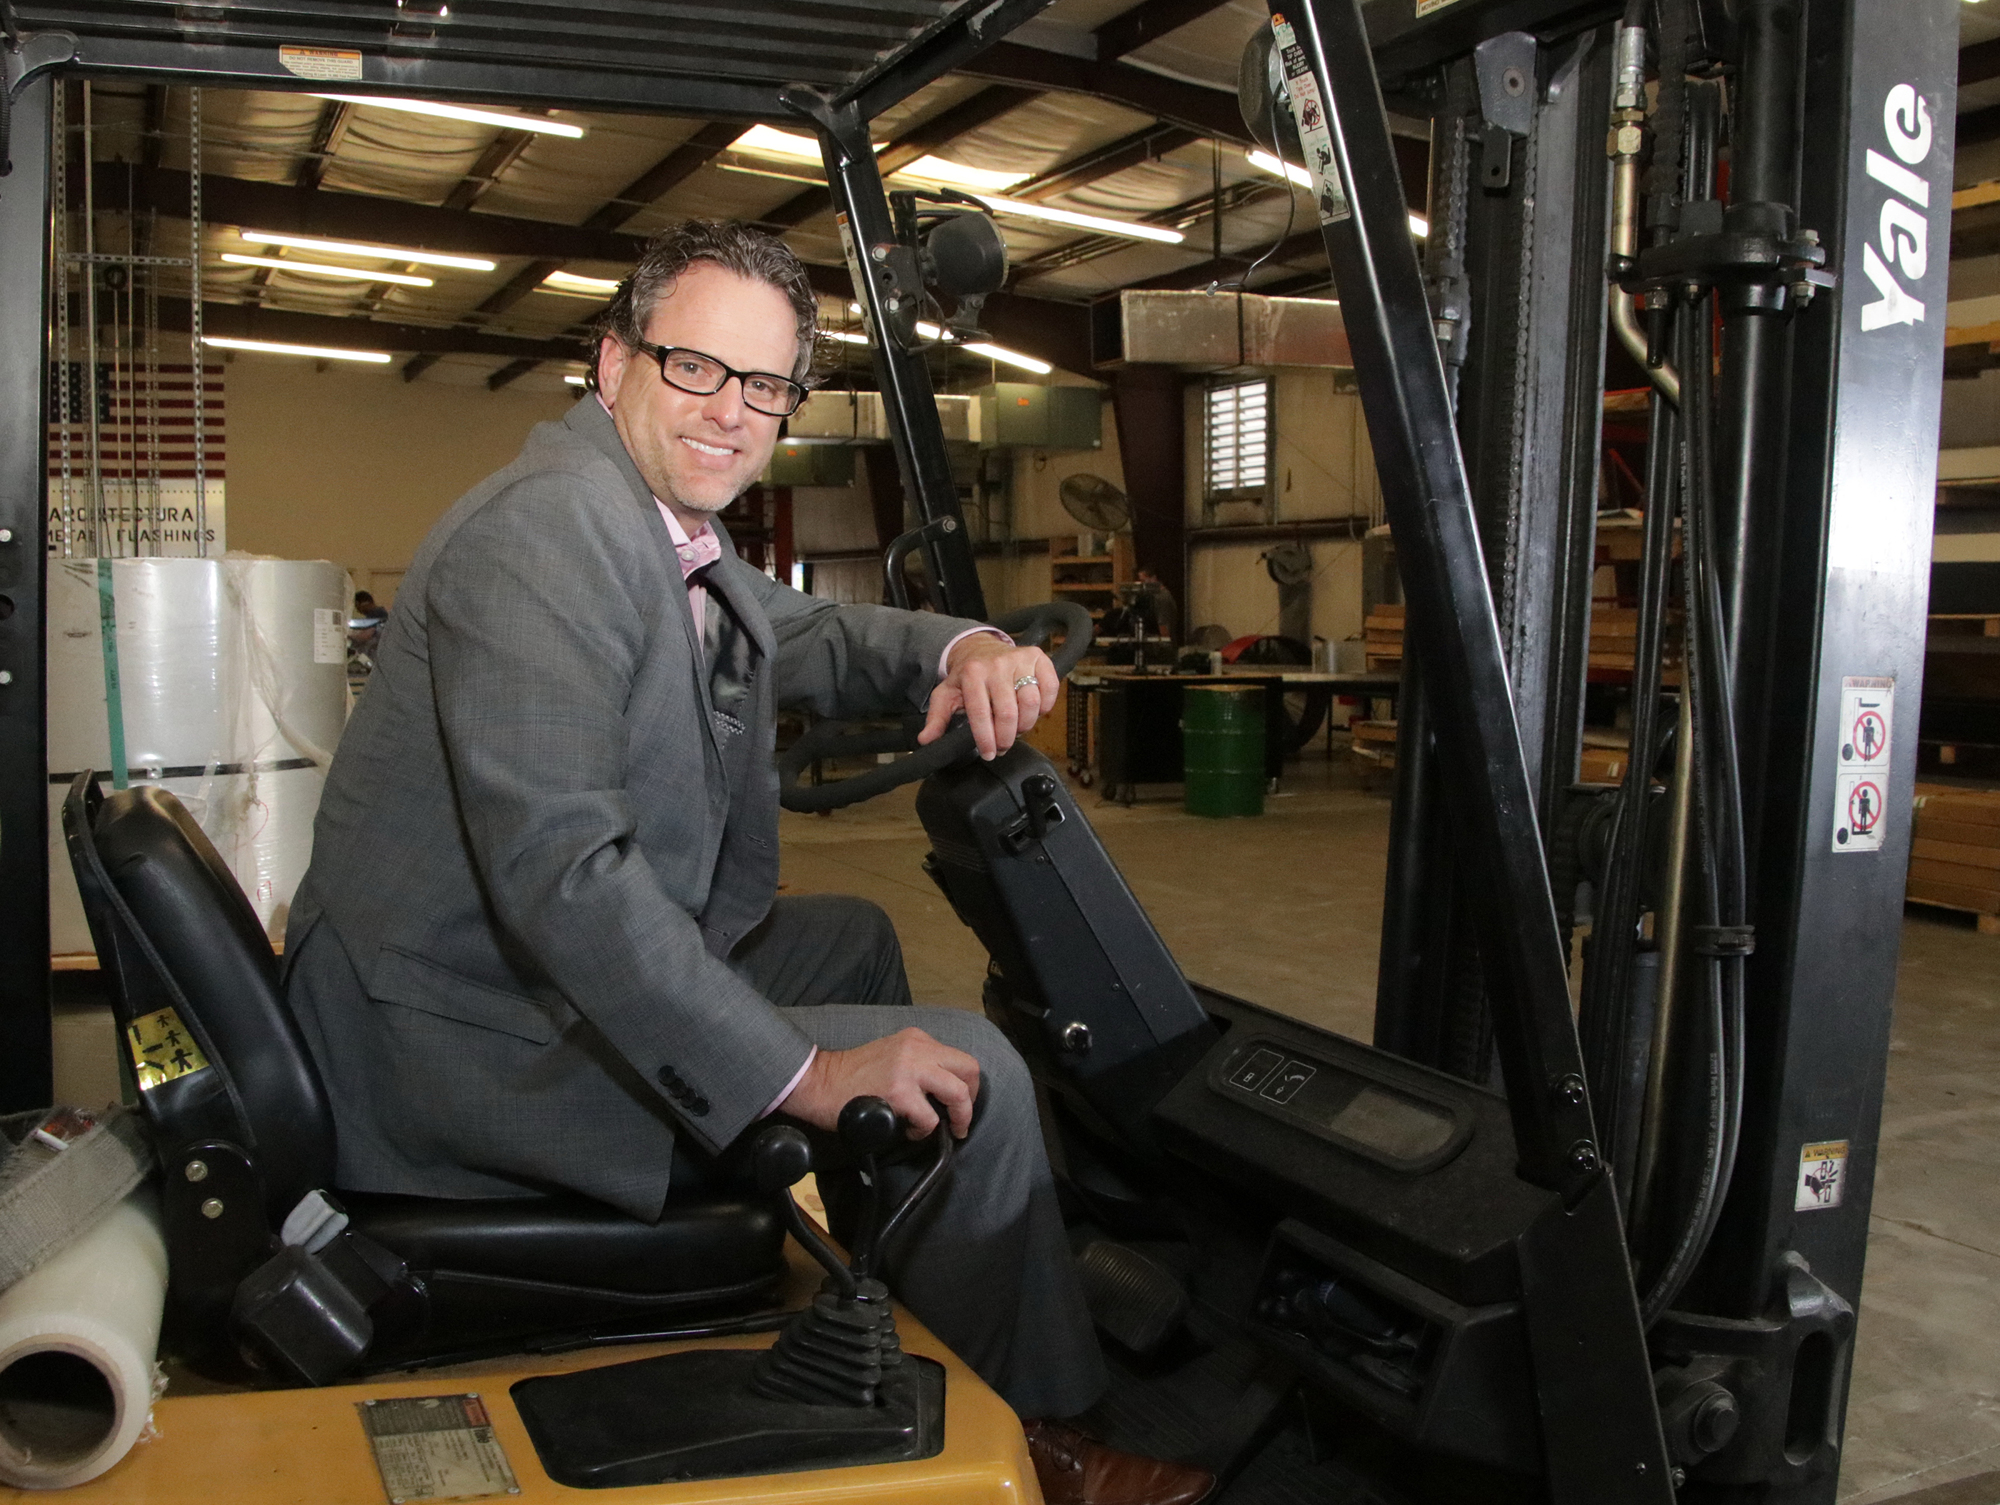 Jeff Bonk not only runs the company, he's also known to run the forklift when his fabricators are too busy to retrieve materials.